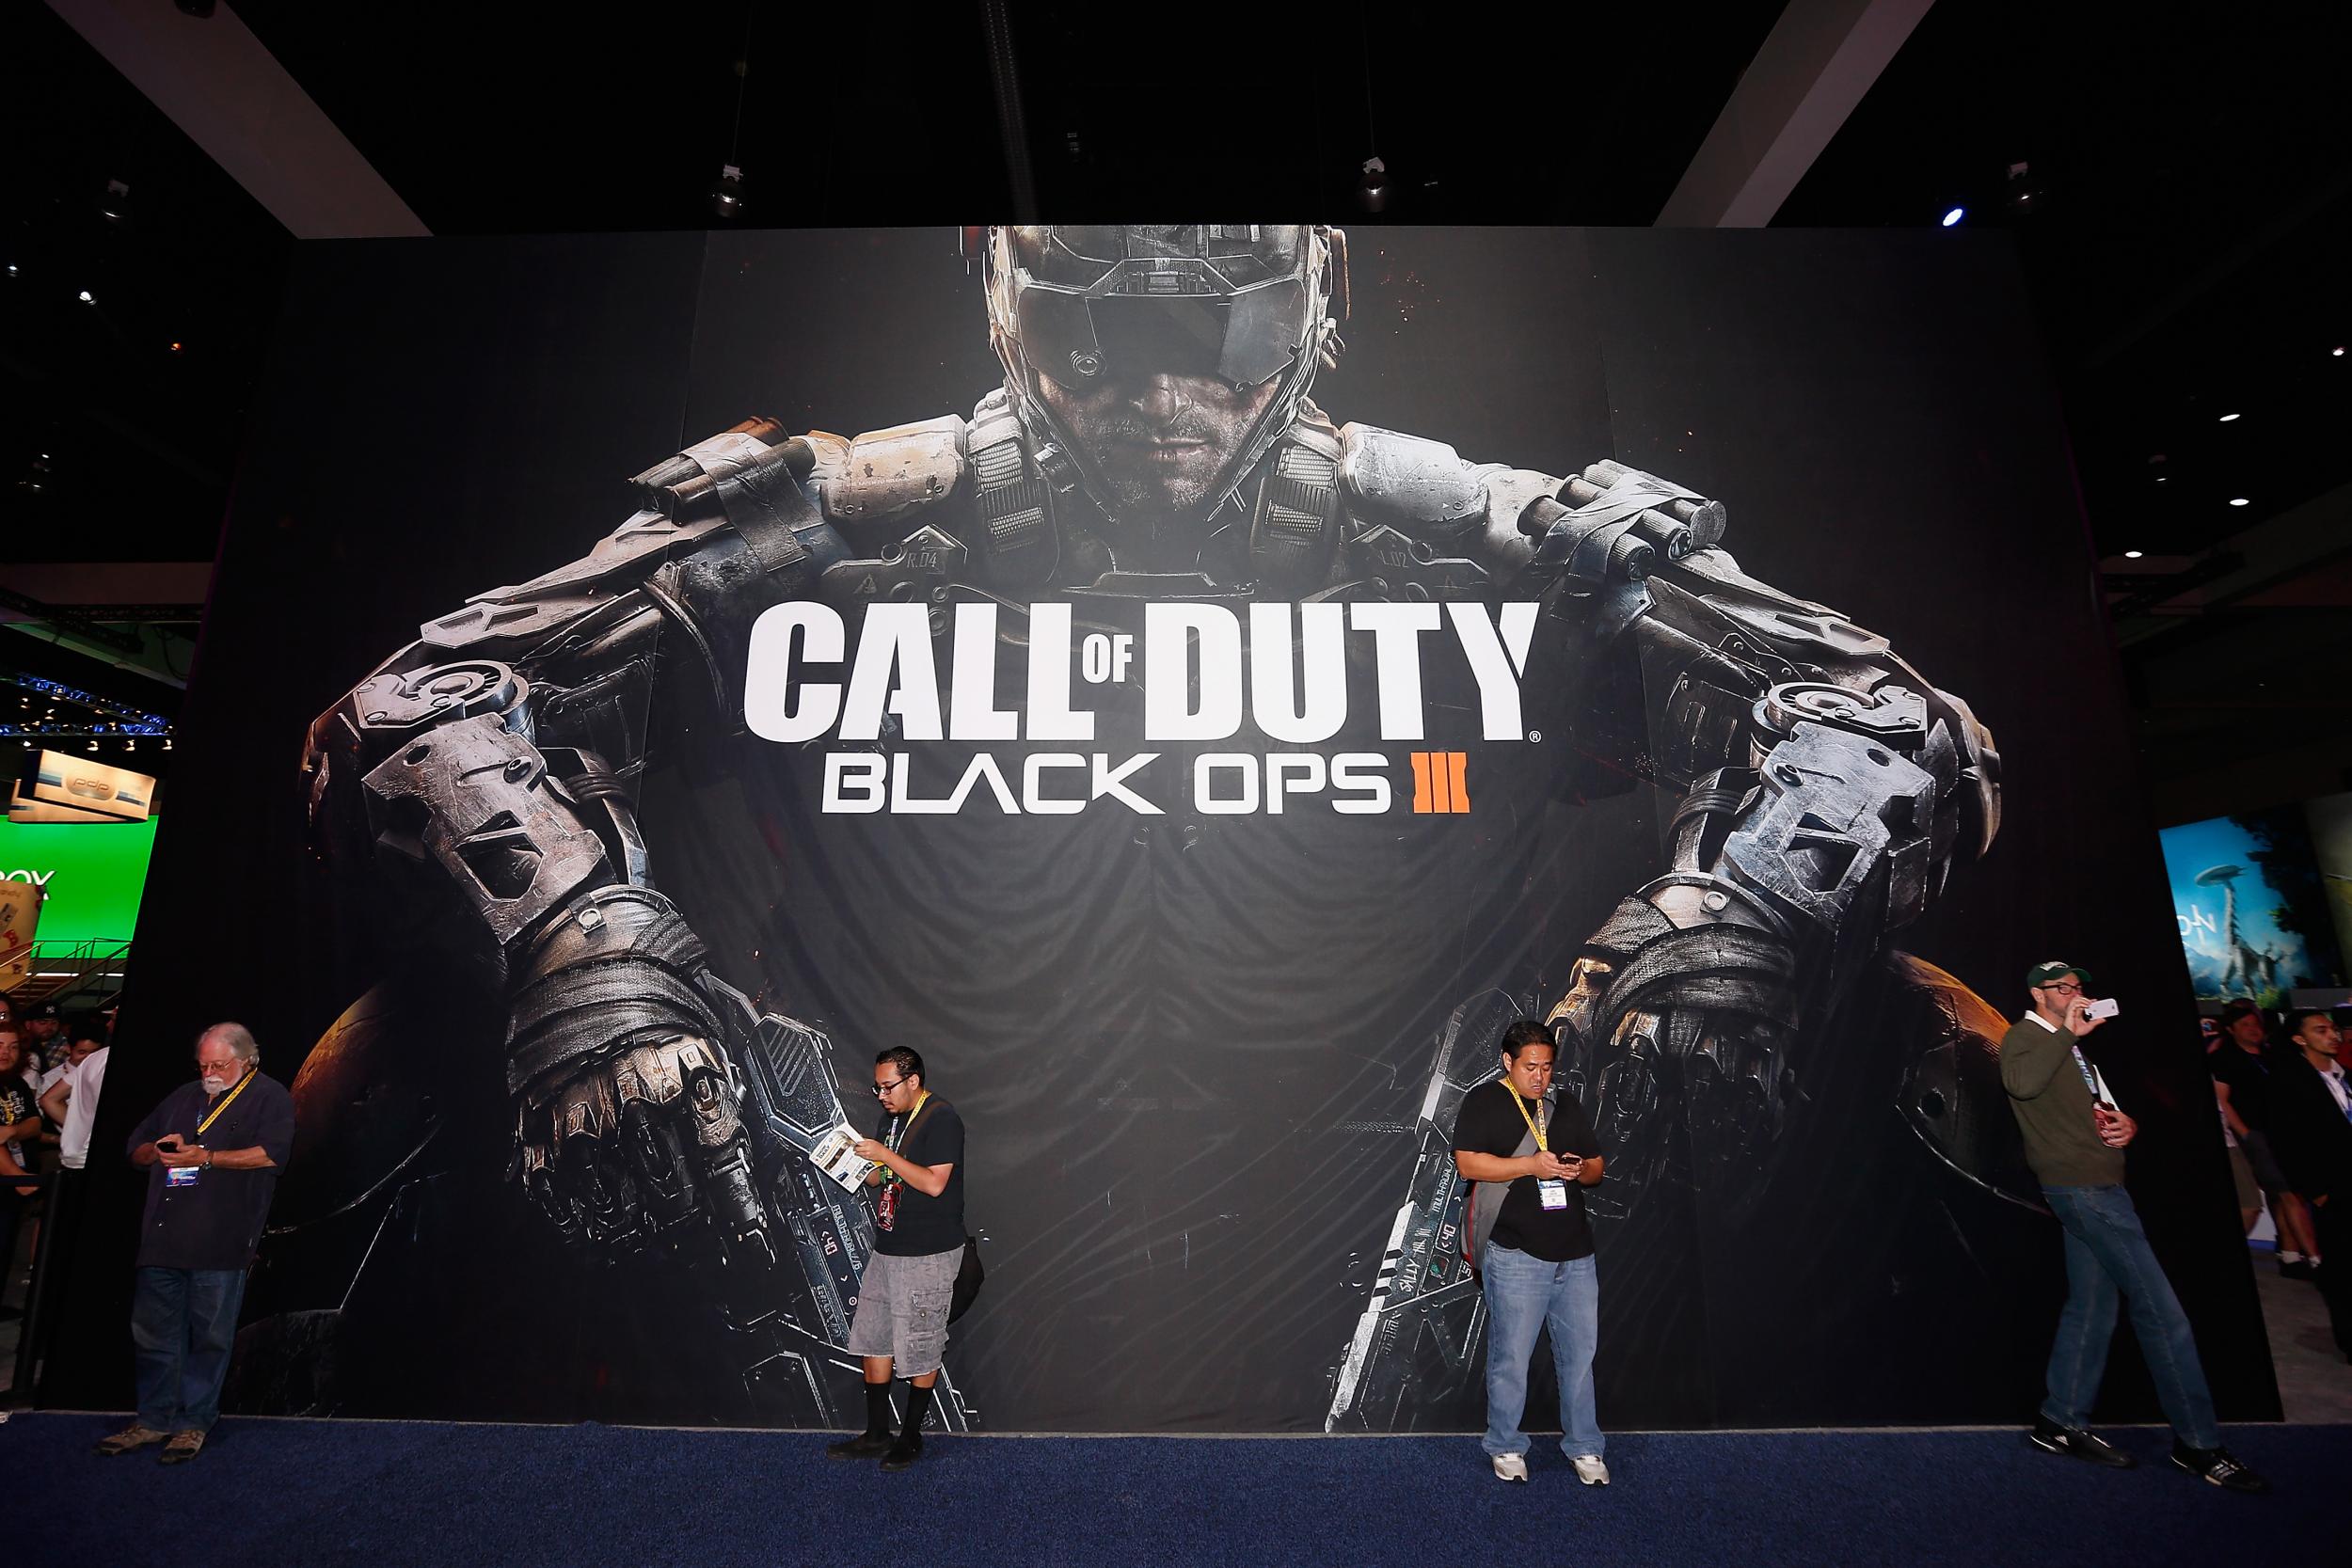 Blockbuster game Call of Duty: Black Ops 3 topped this year's Christmas games chart